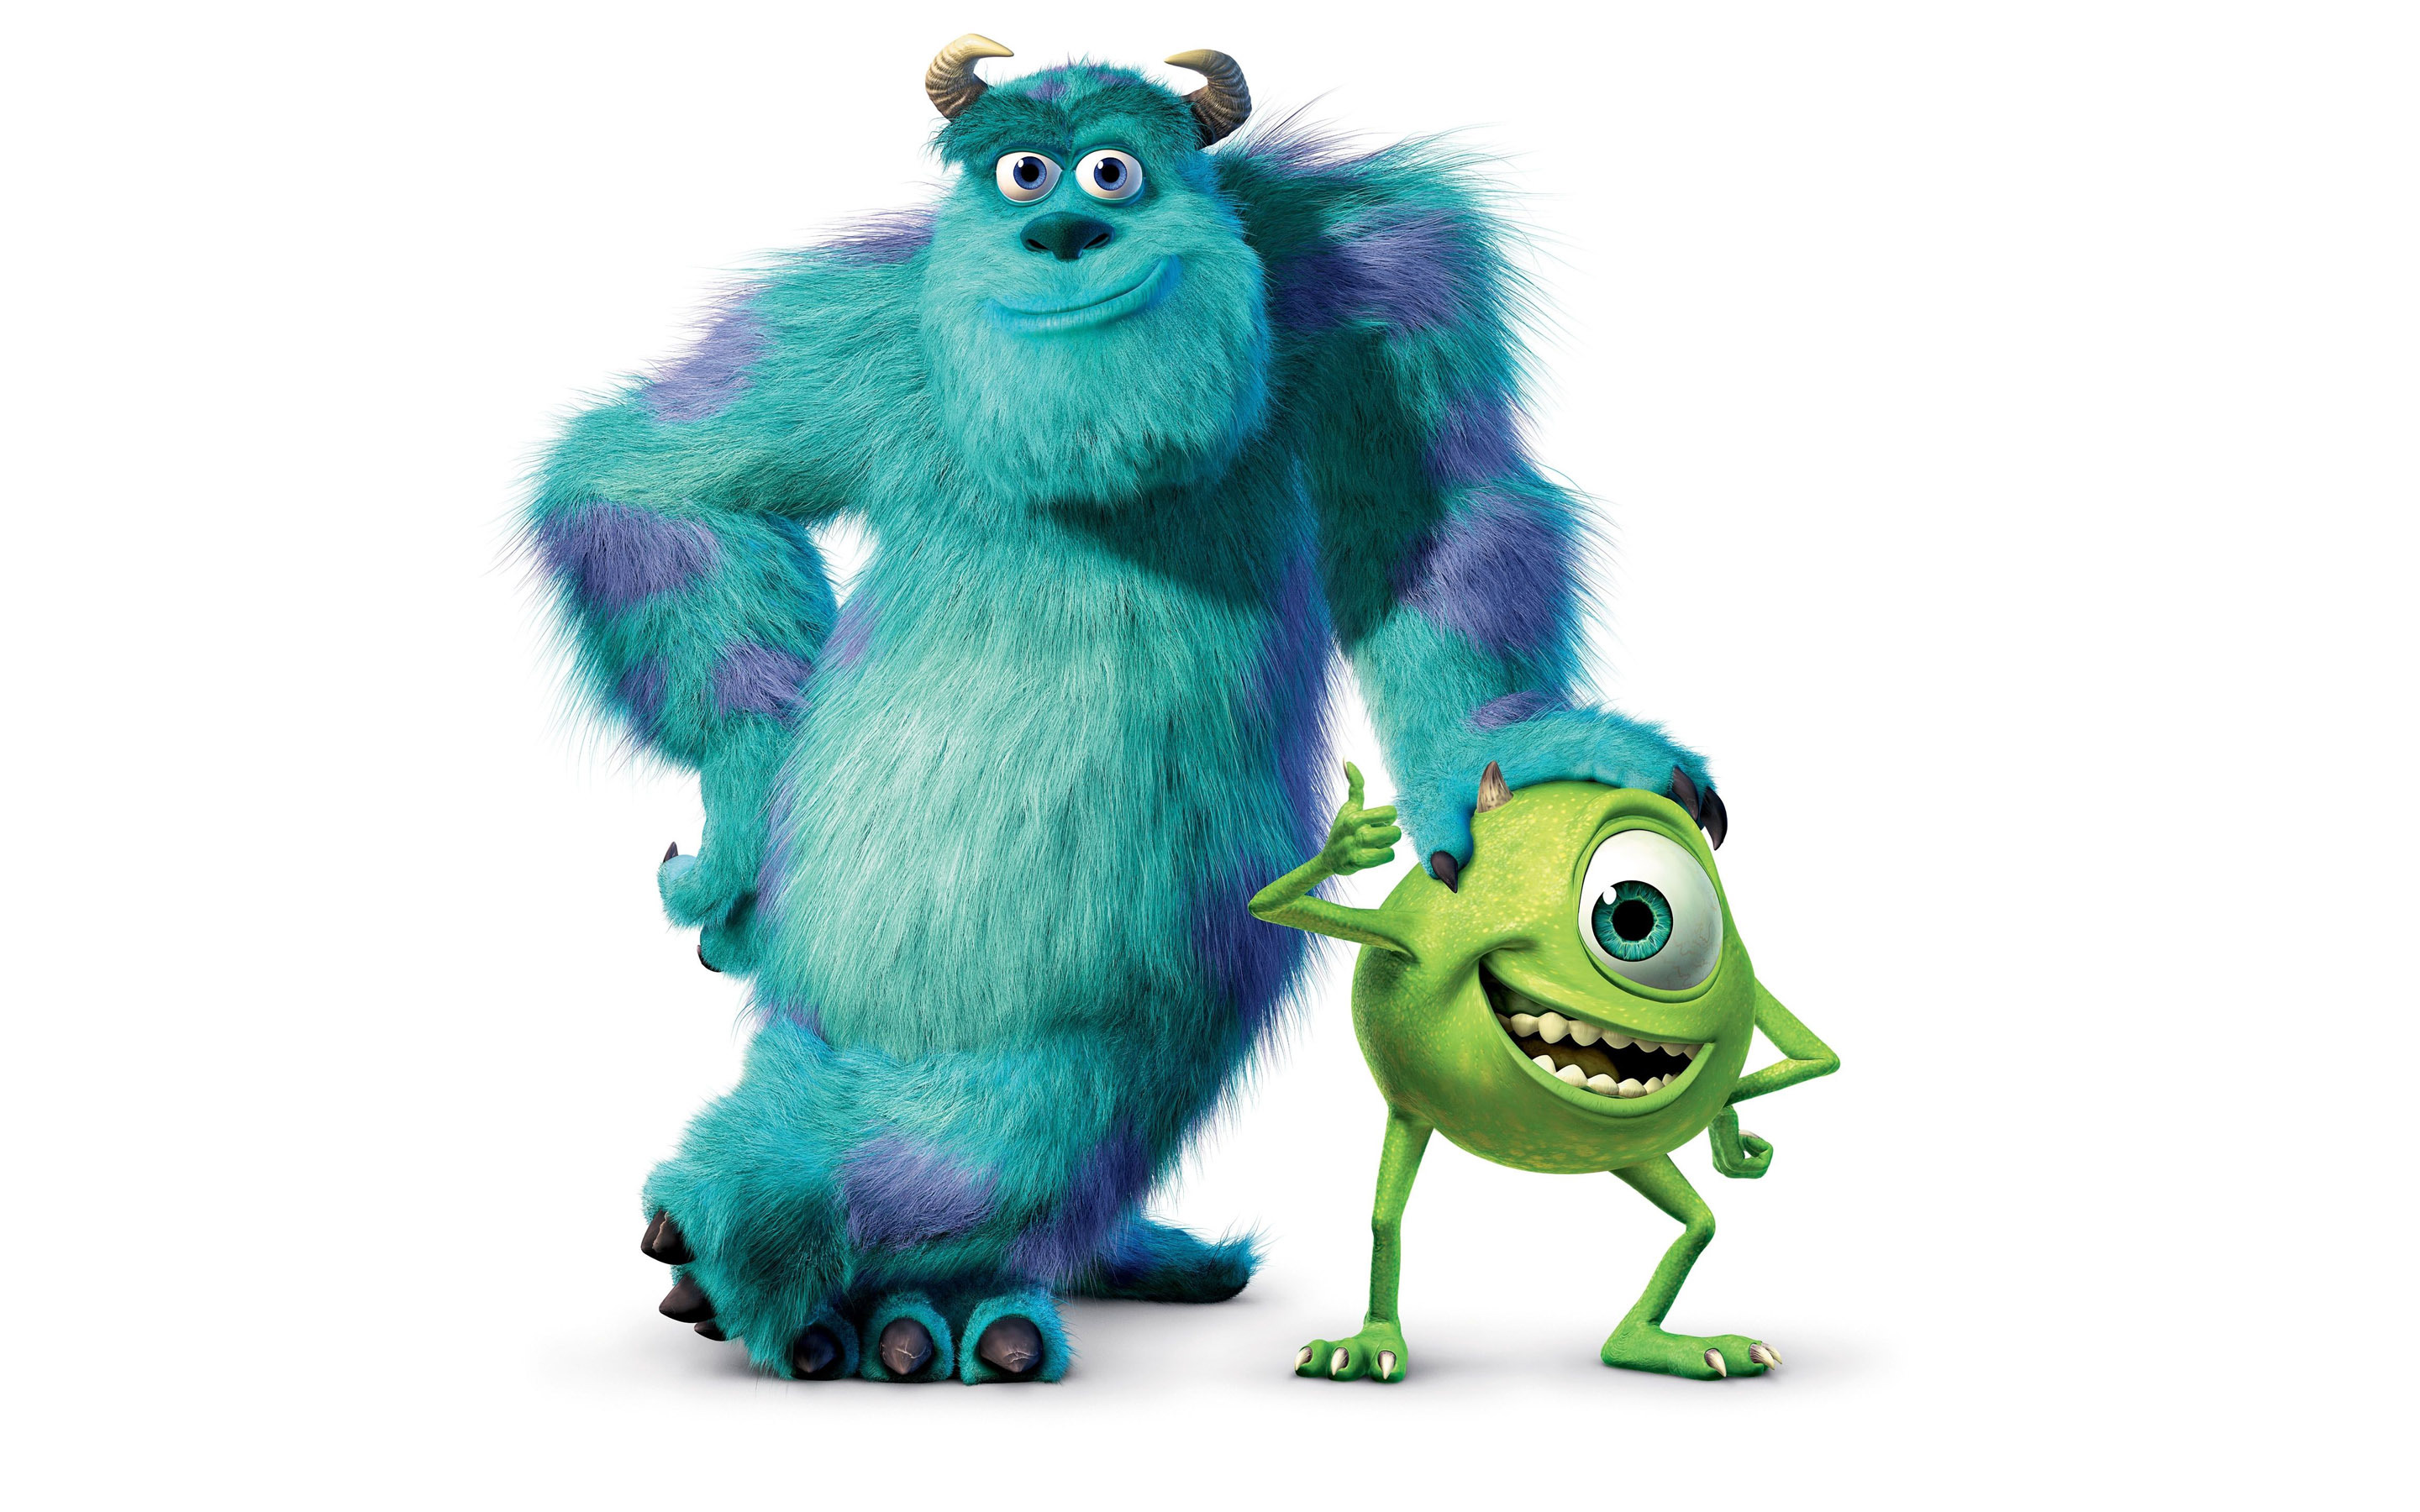 BOO ~ Monsters Inc., 2001